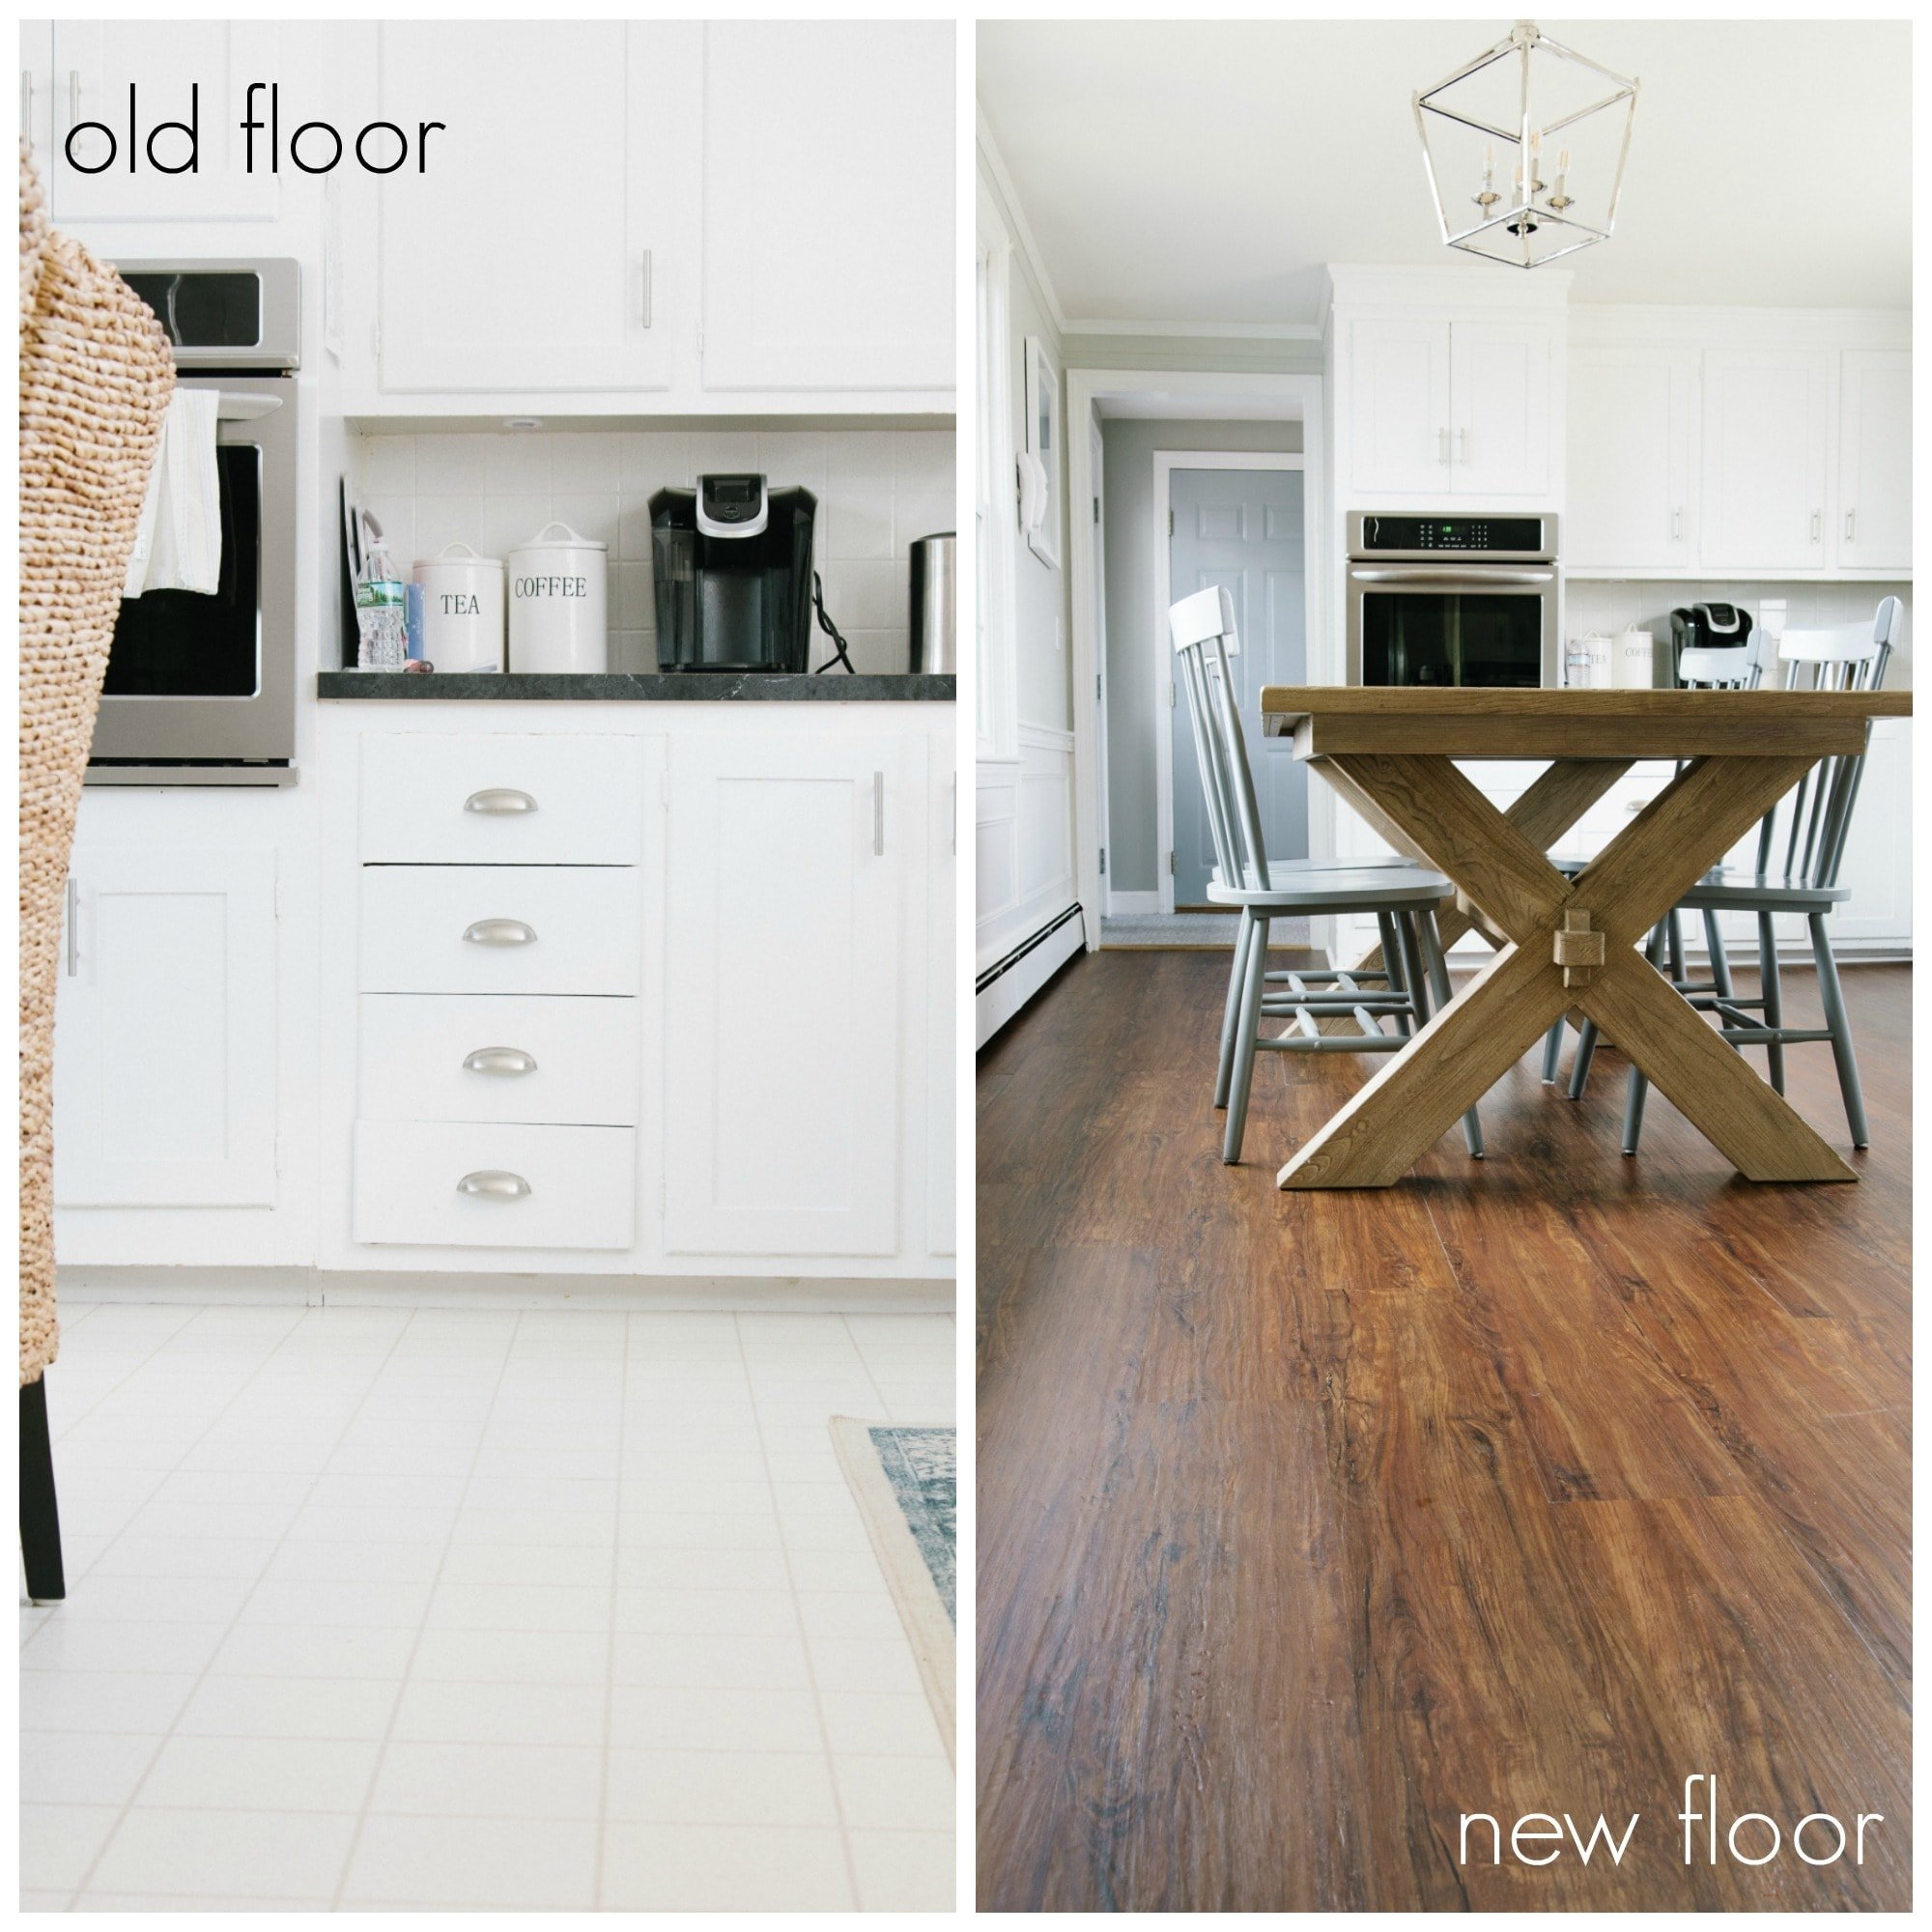 How to install luxury vinyl plank flooring,  before and after